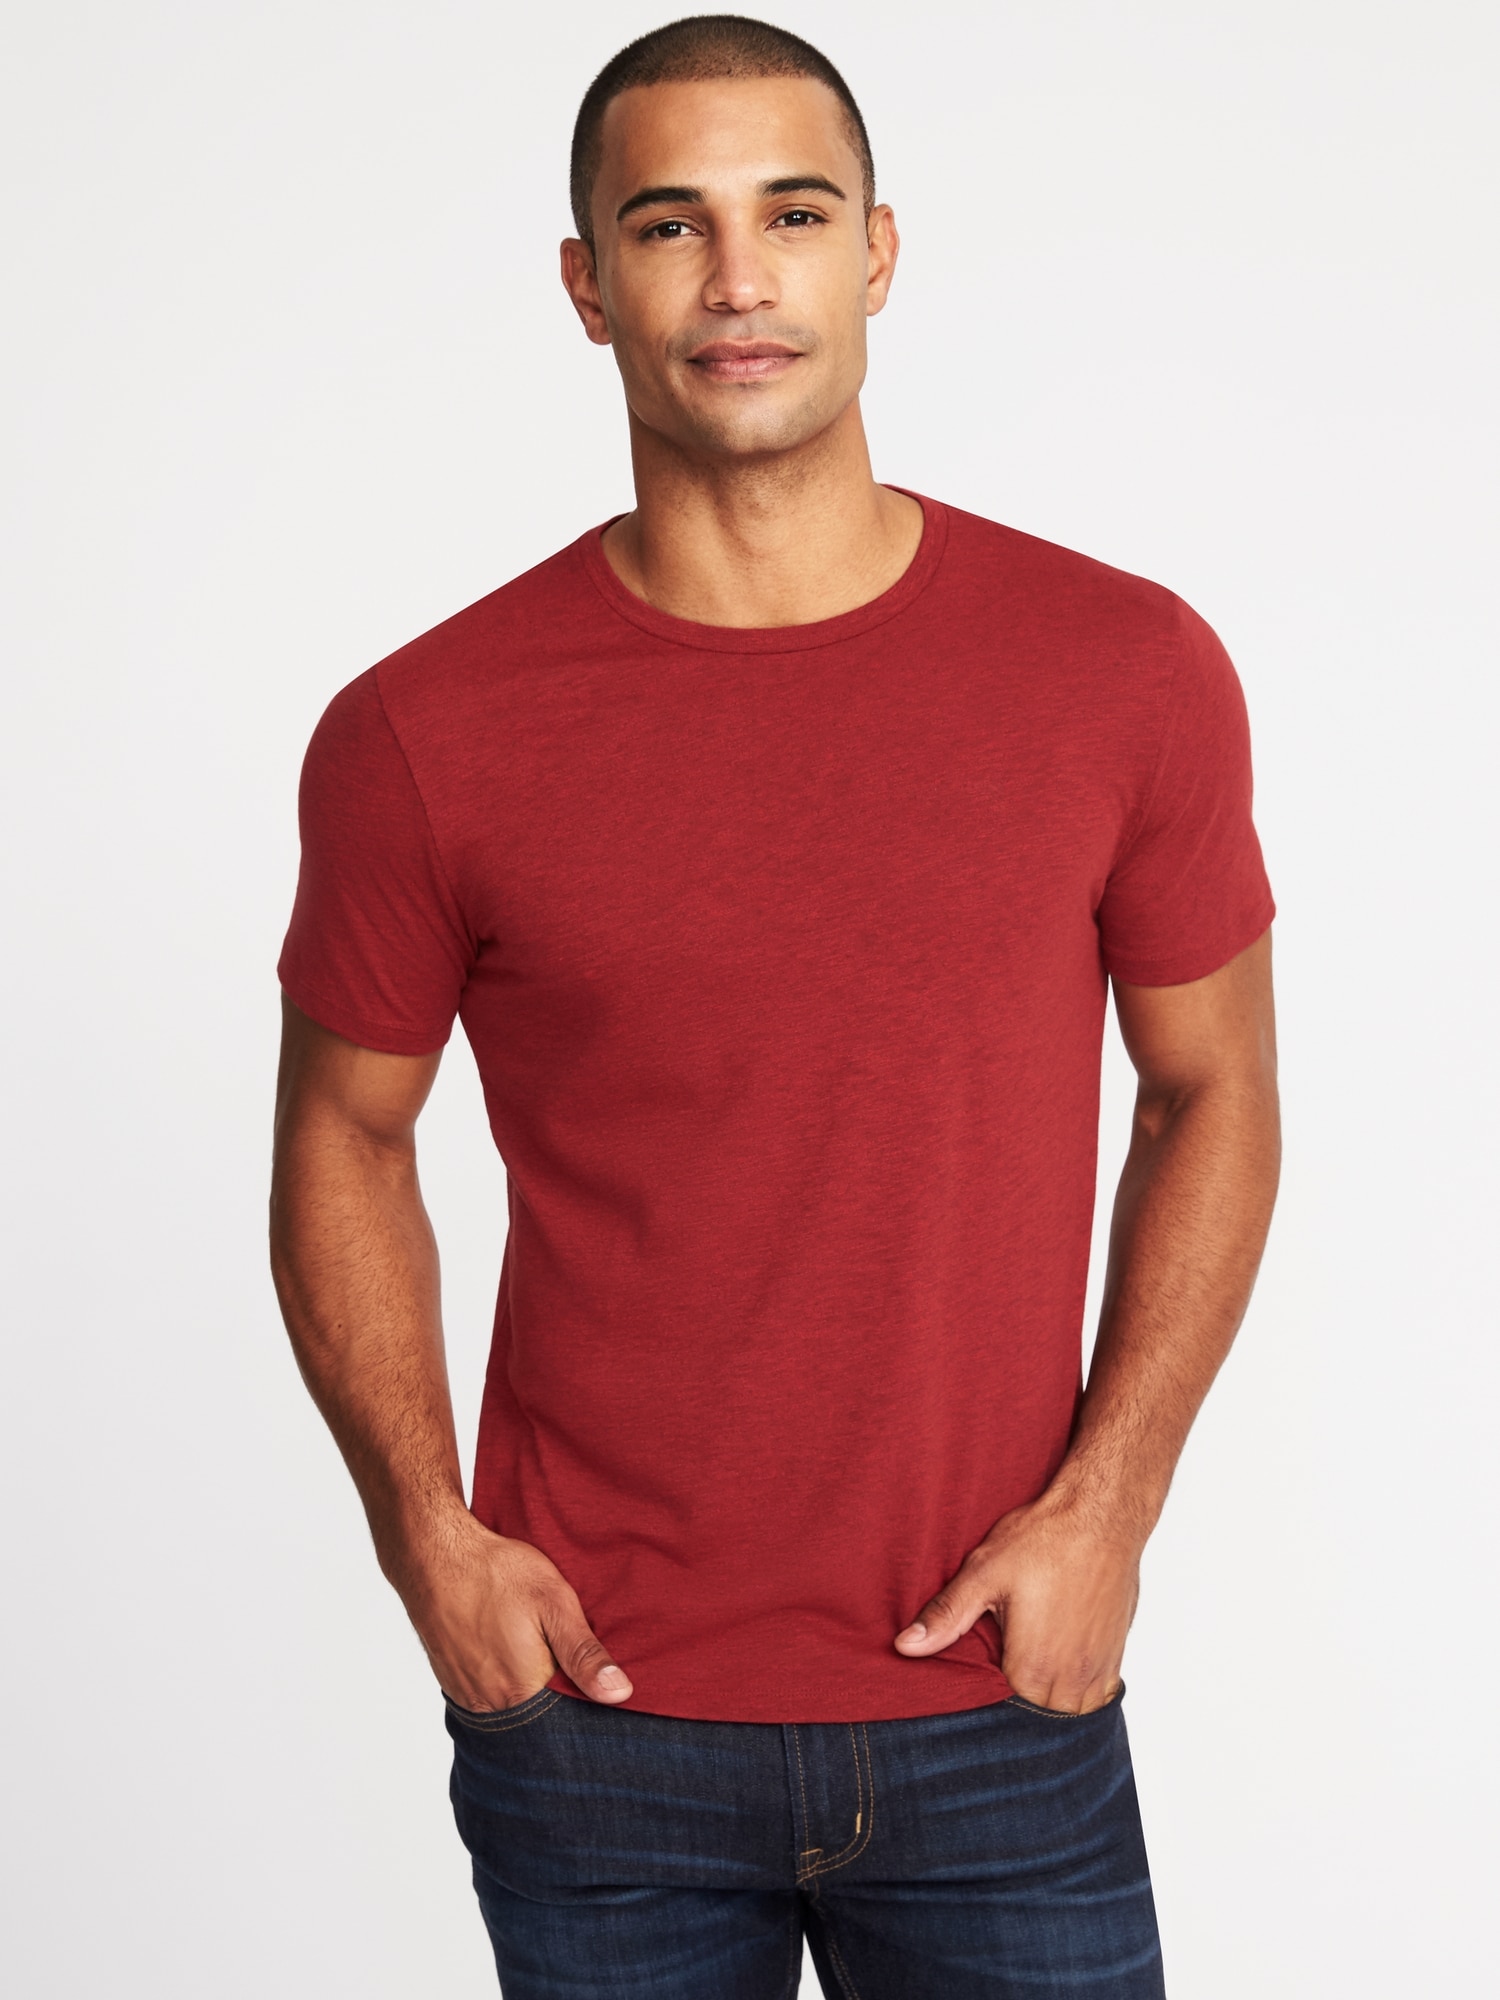 Soft-Washed Perfect-Fit T-Shirt for Men